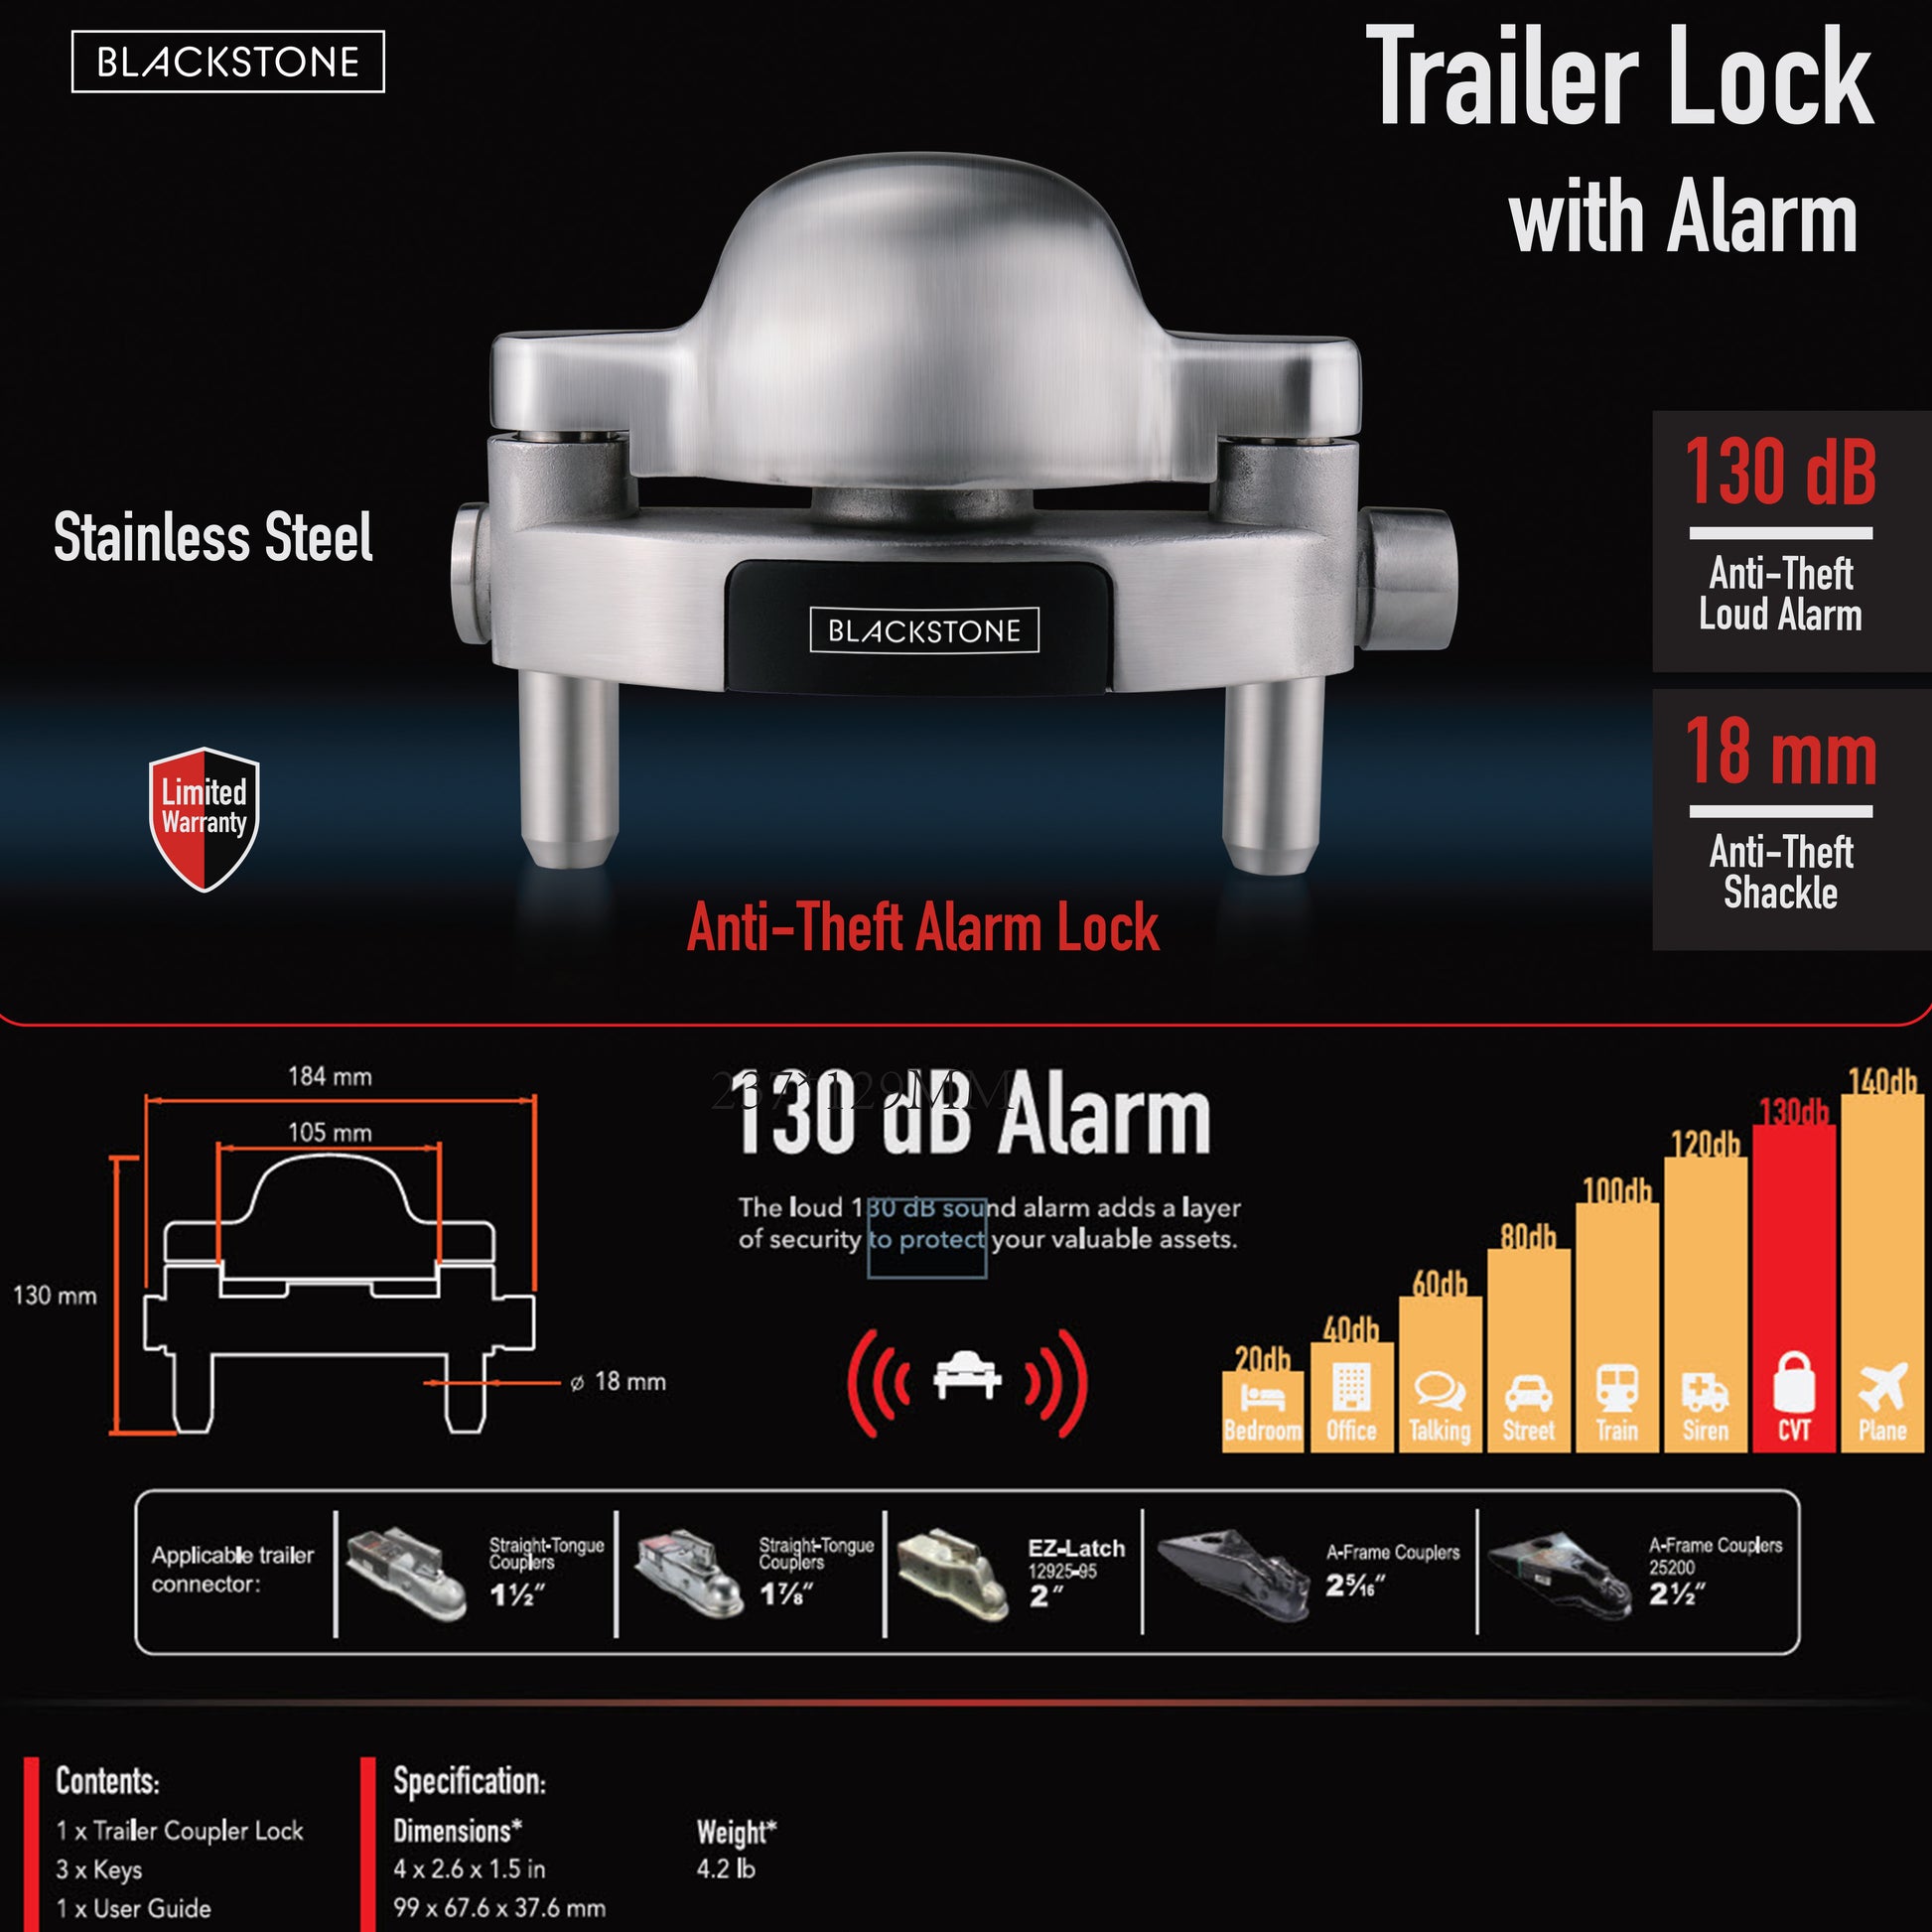 Informative promotional graphic for Black Stone Trailer Lock with Alarm. Central focus on the stainless steel lock with '130 dB' and '18 mm Anti-Theft Shackle' emphasized. Features include an anti-theft alarm lock, limited warranty, and compatibility with various trailer connectors. The graphic also provides a sound level comparison chart, lock dimensions, and a silhouette showing where to place the lock on a trailer connector